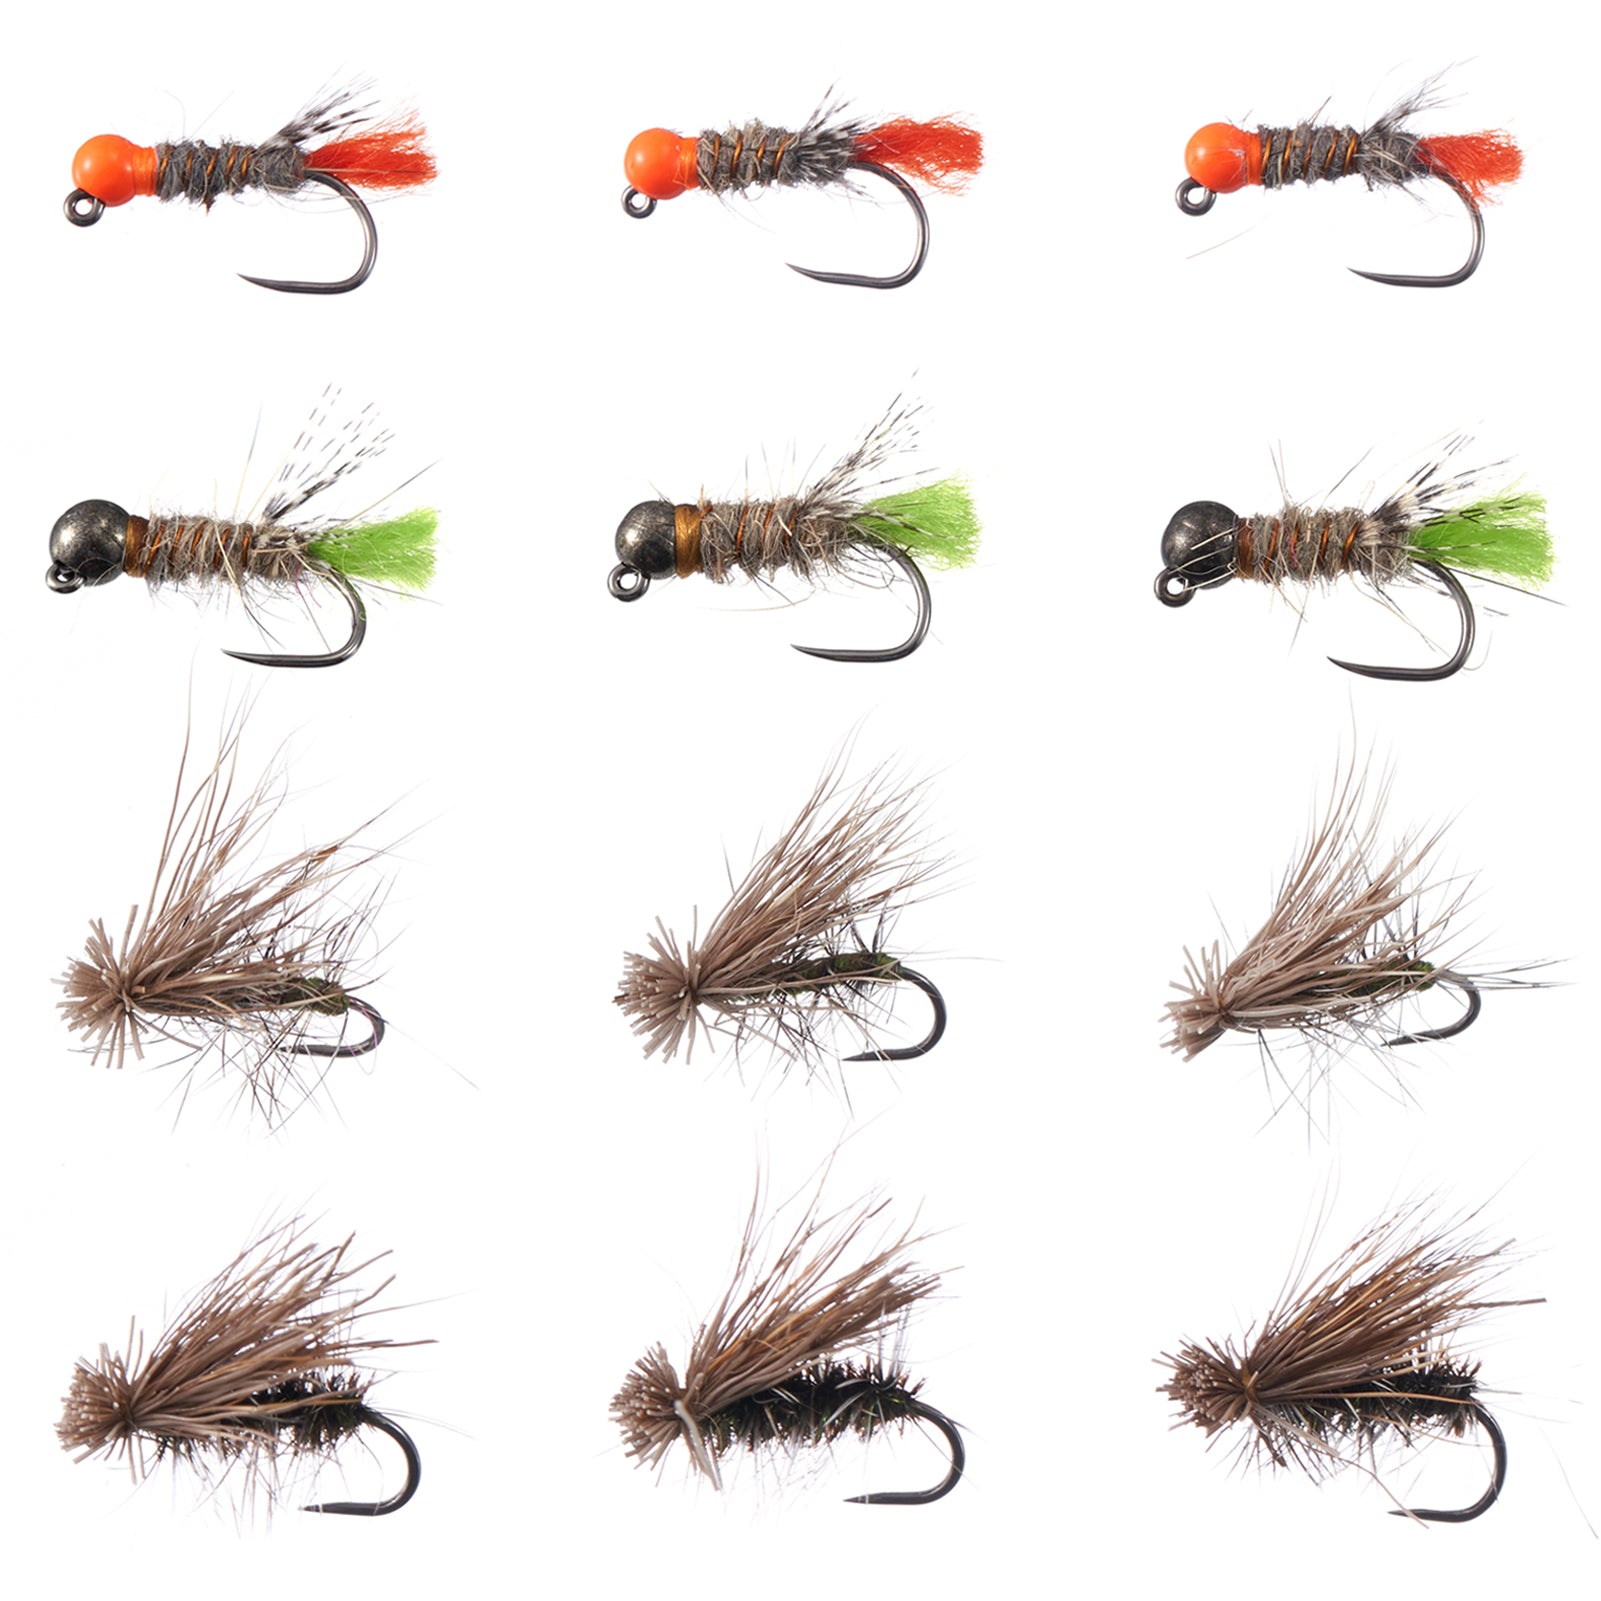 Reversed Tied Dry Fly Selection - from Barbless Flies